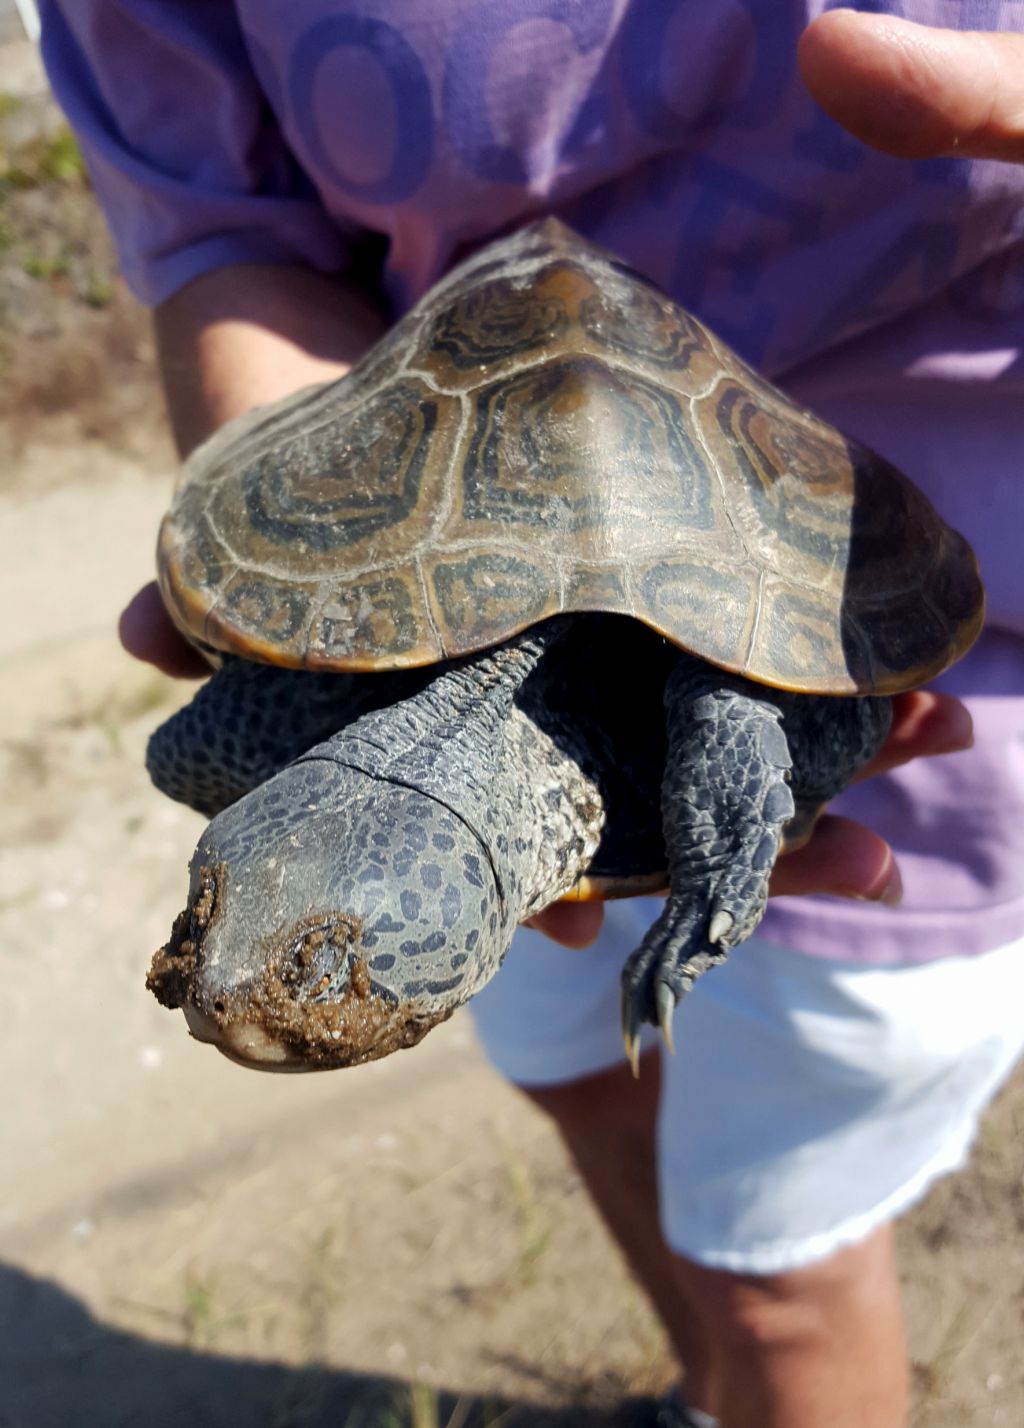 Female terrapin right after nesting with a face full of dirt from testing the soil conditions. (photo by Olivia Bourque).